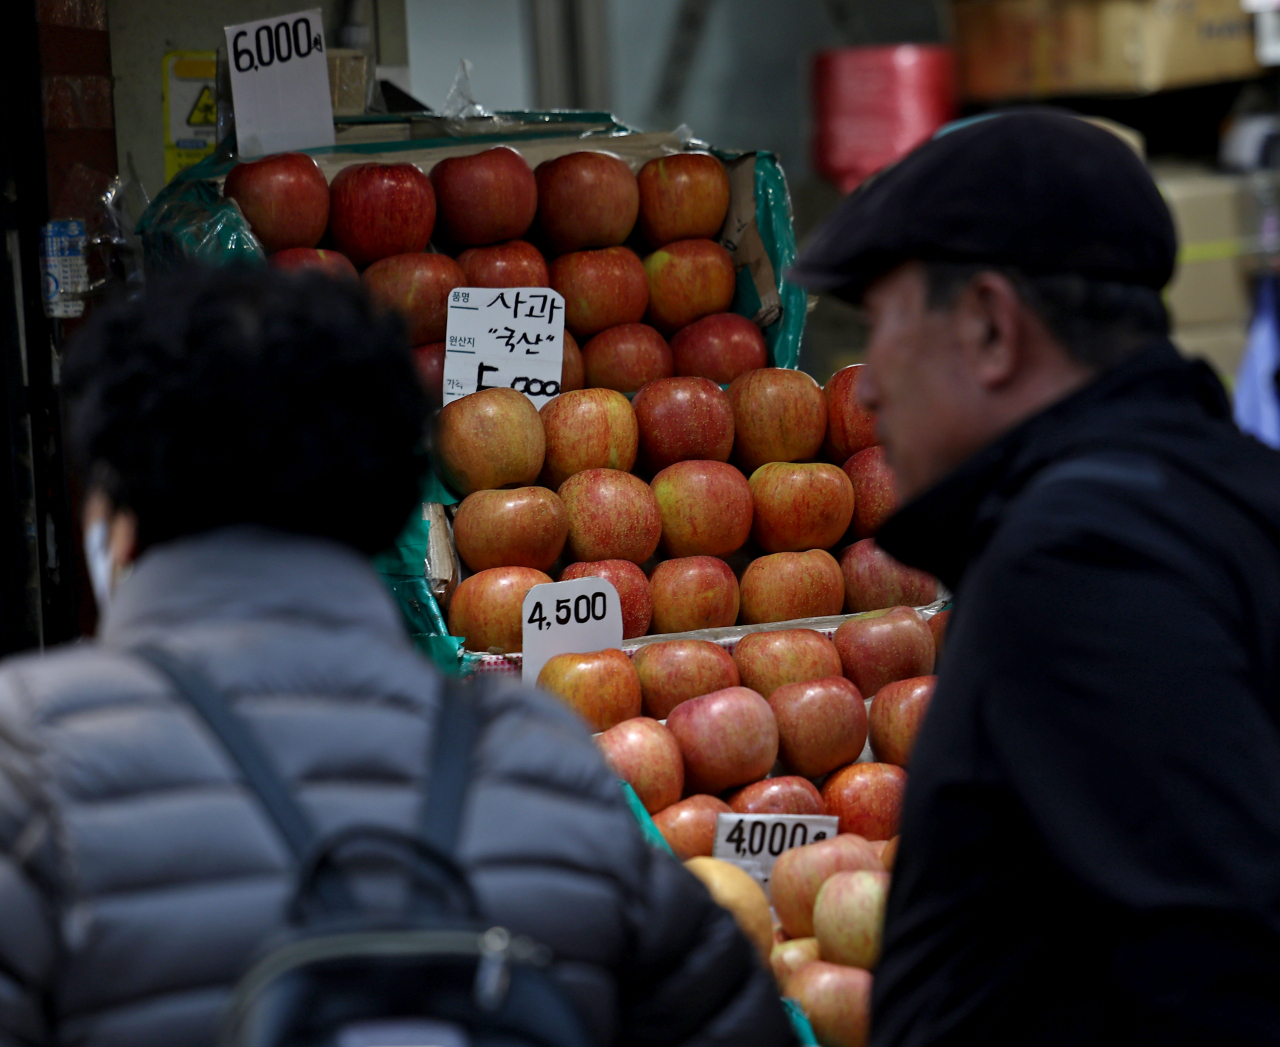 Apples are displayed at a marketplace in Seoul on Sunday. (Yonhap)